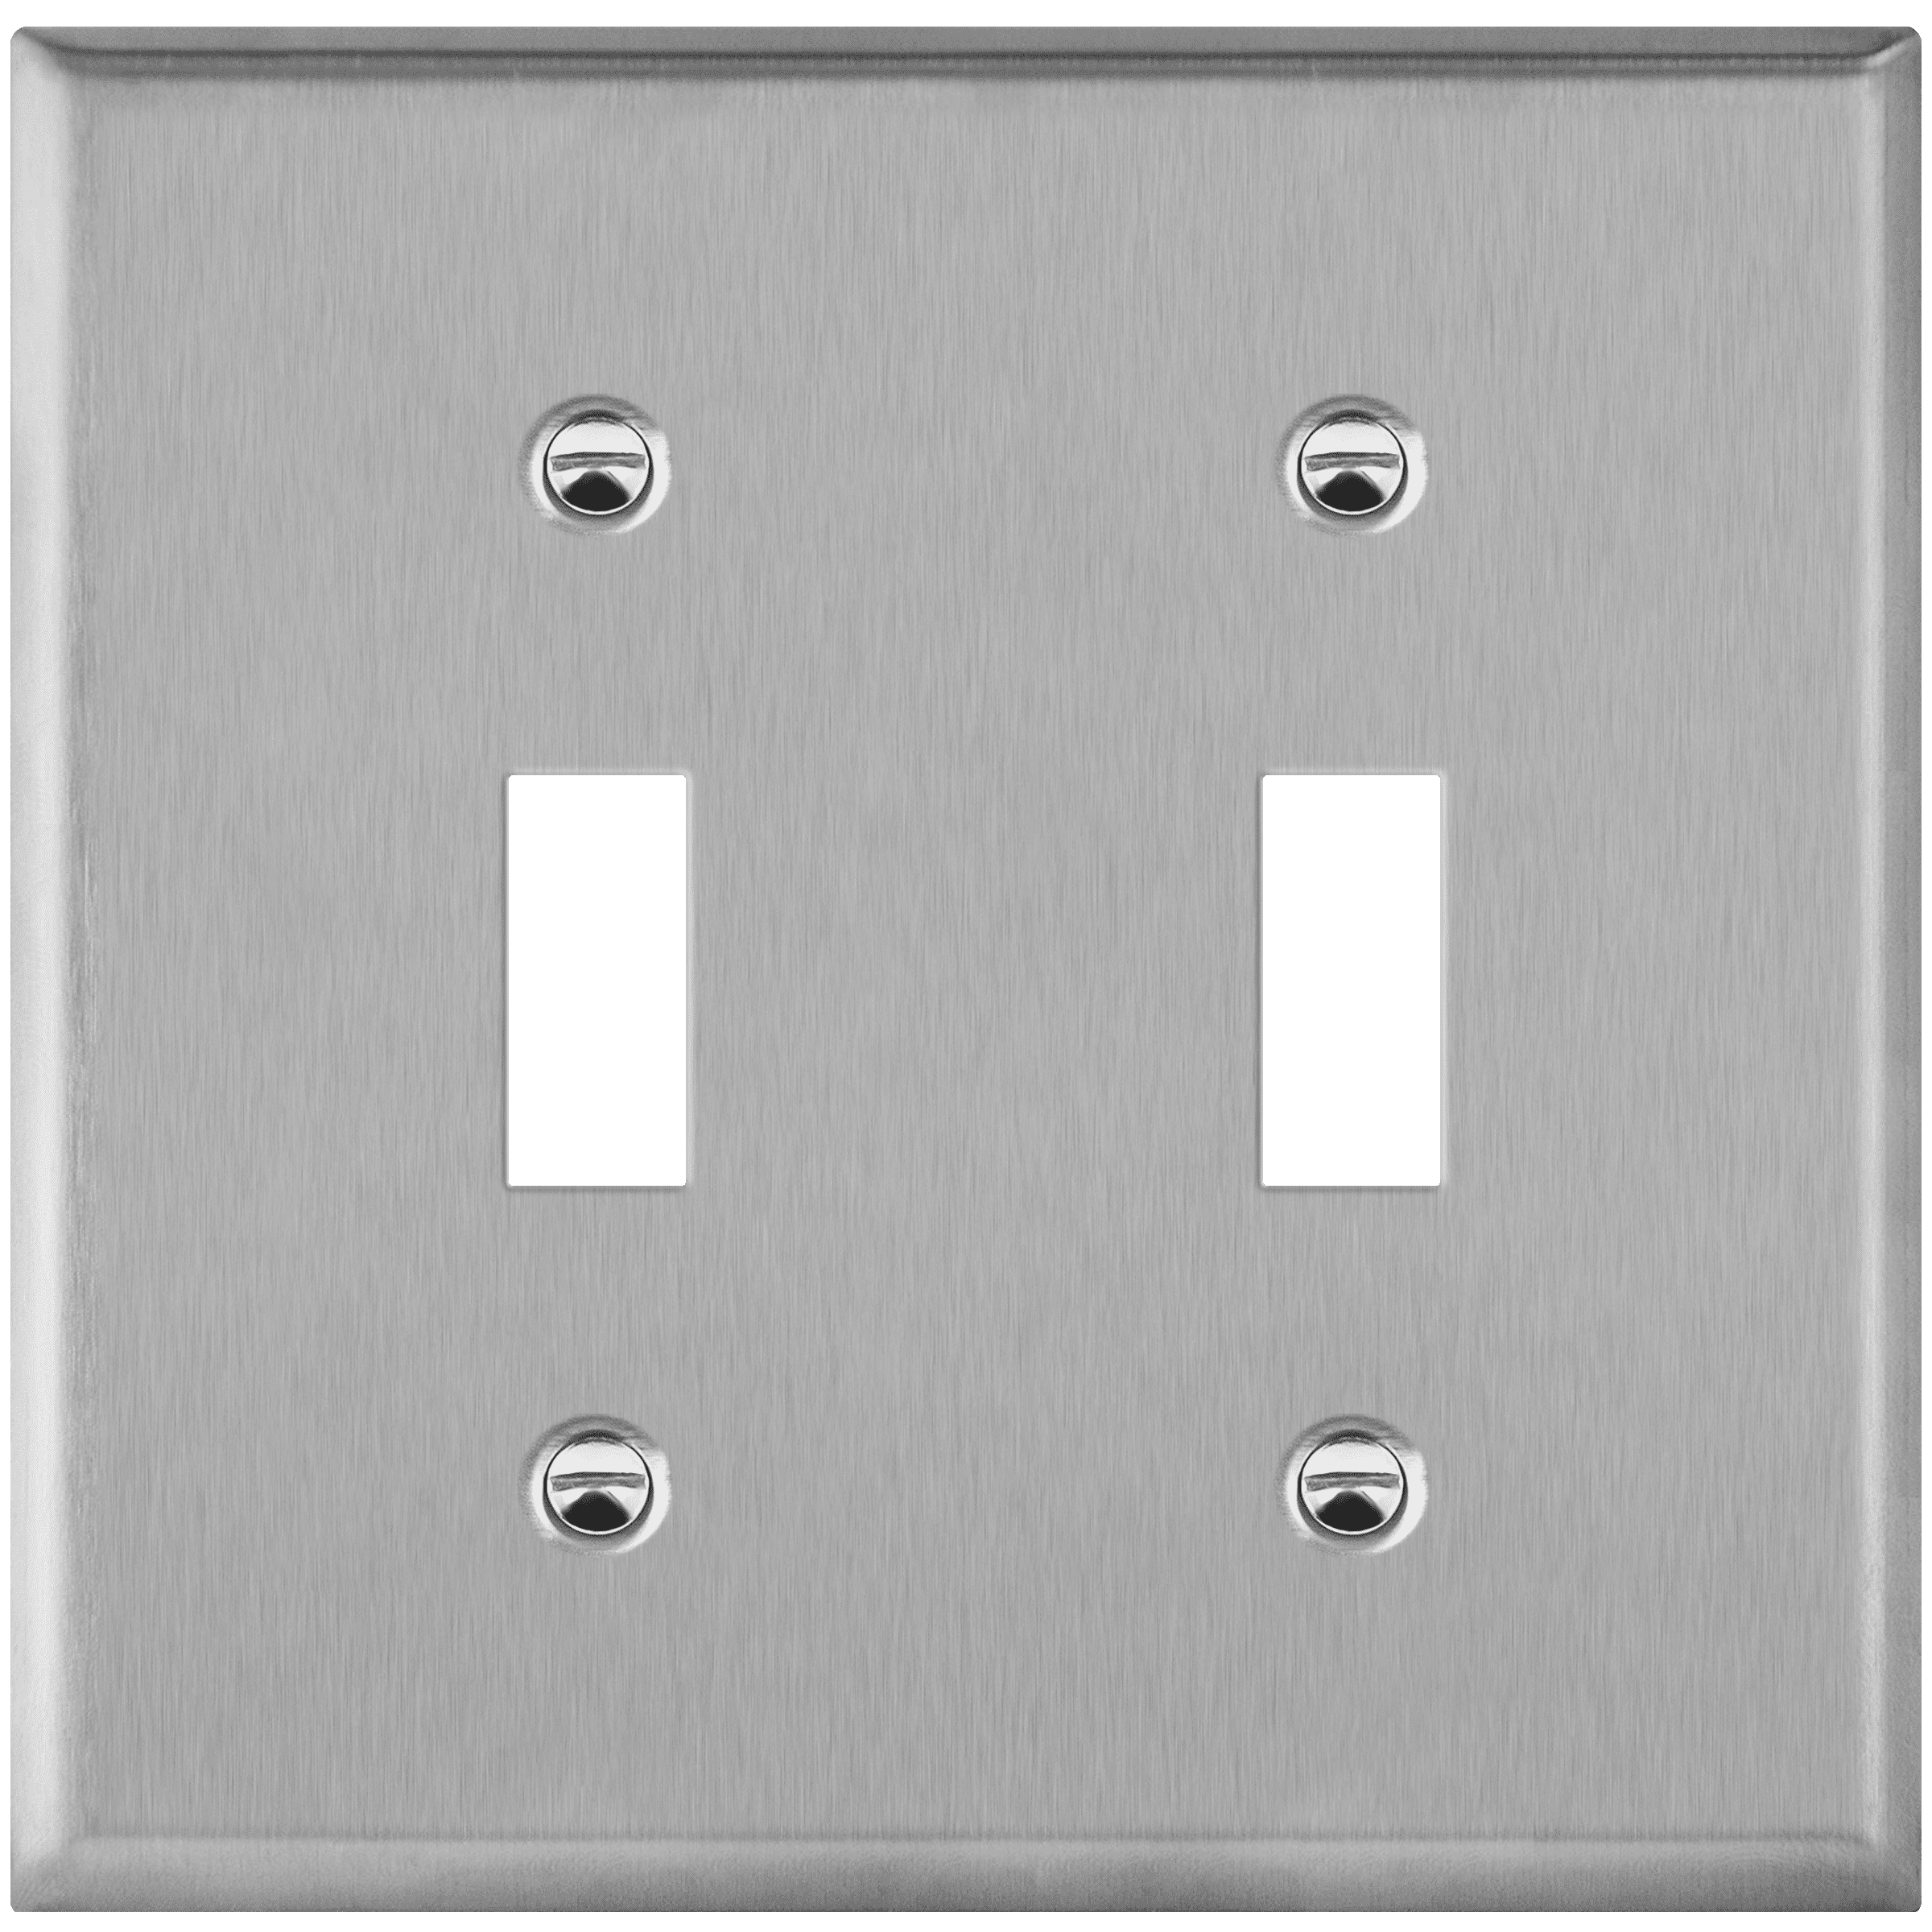 Silver Size 1-Gang 4.50x 2.76 430 Stainless Steel ENERLITES Toggle Light Switch Stainless Steel Wall Plate 7711 UL Listed Metal Plate Corrosive Resistant Cover for Rotary Dimmers Lights